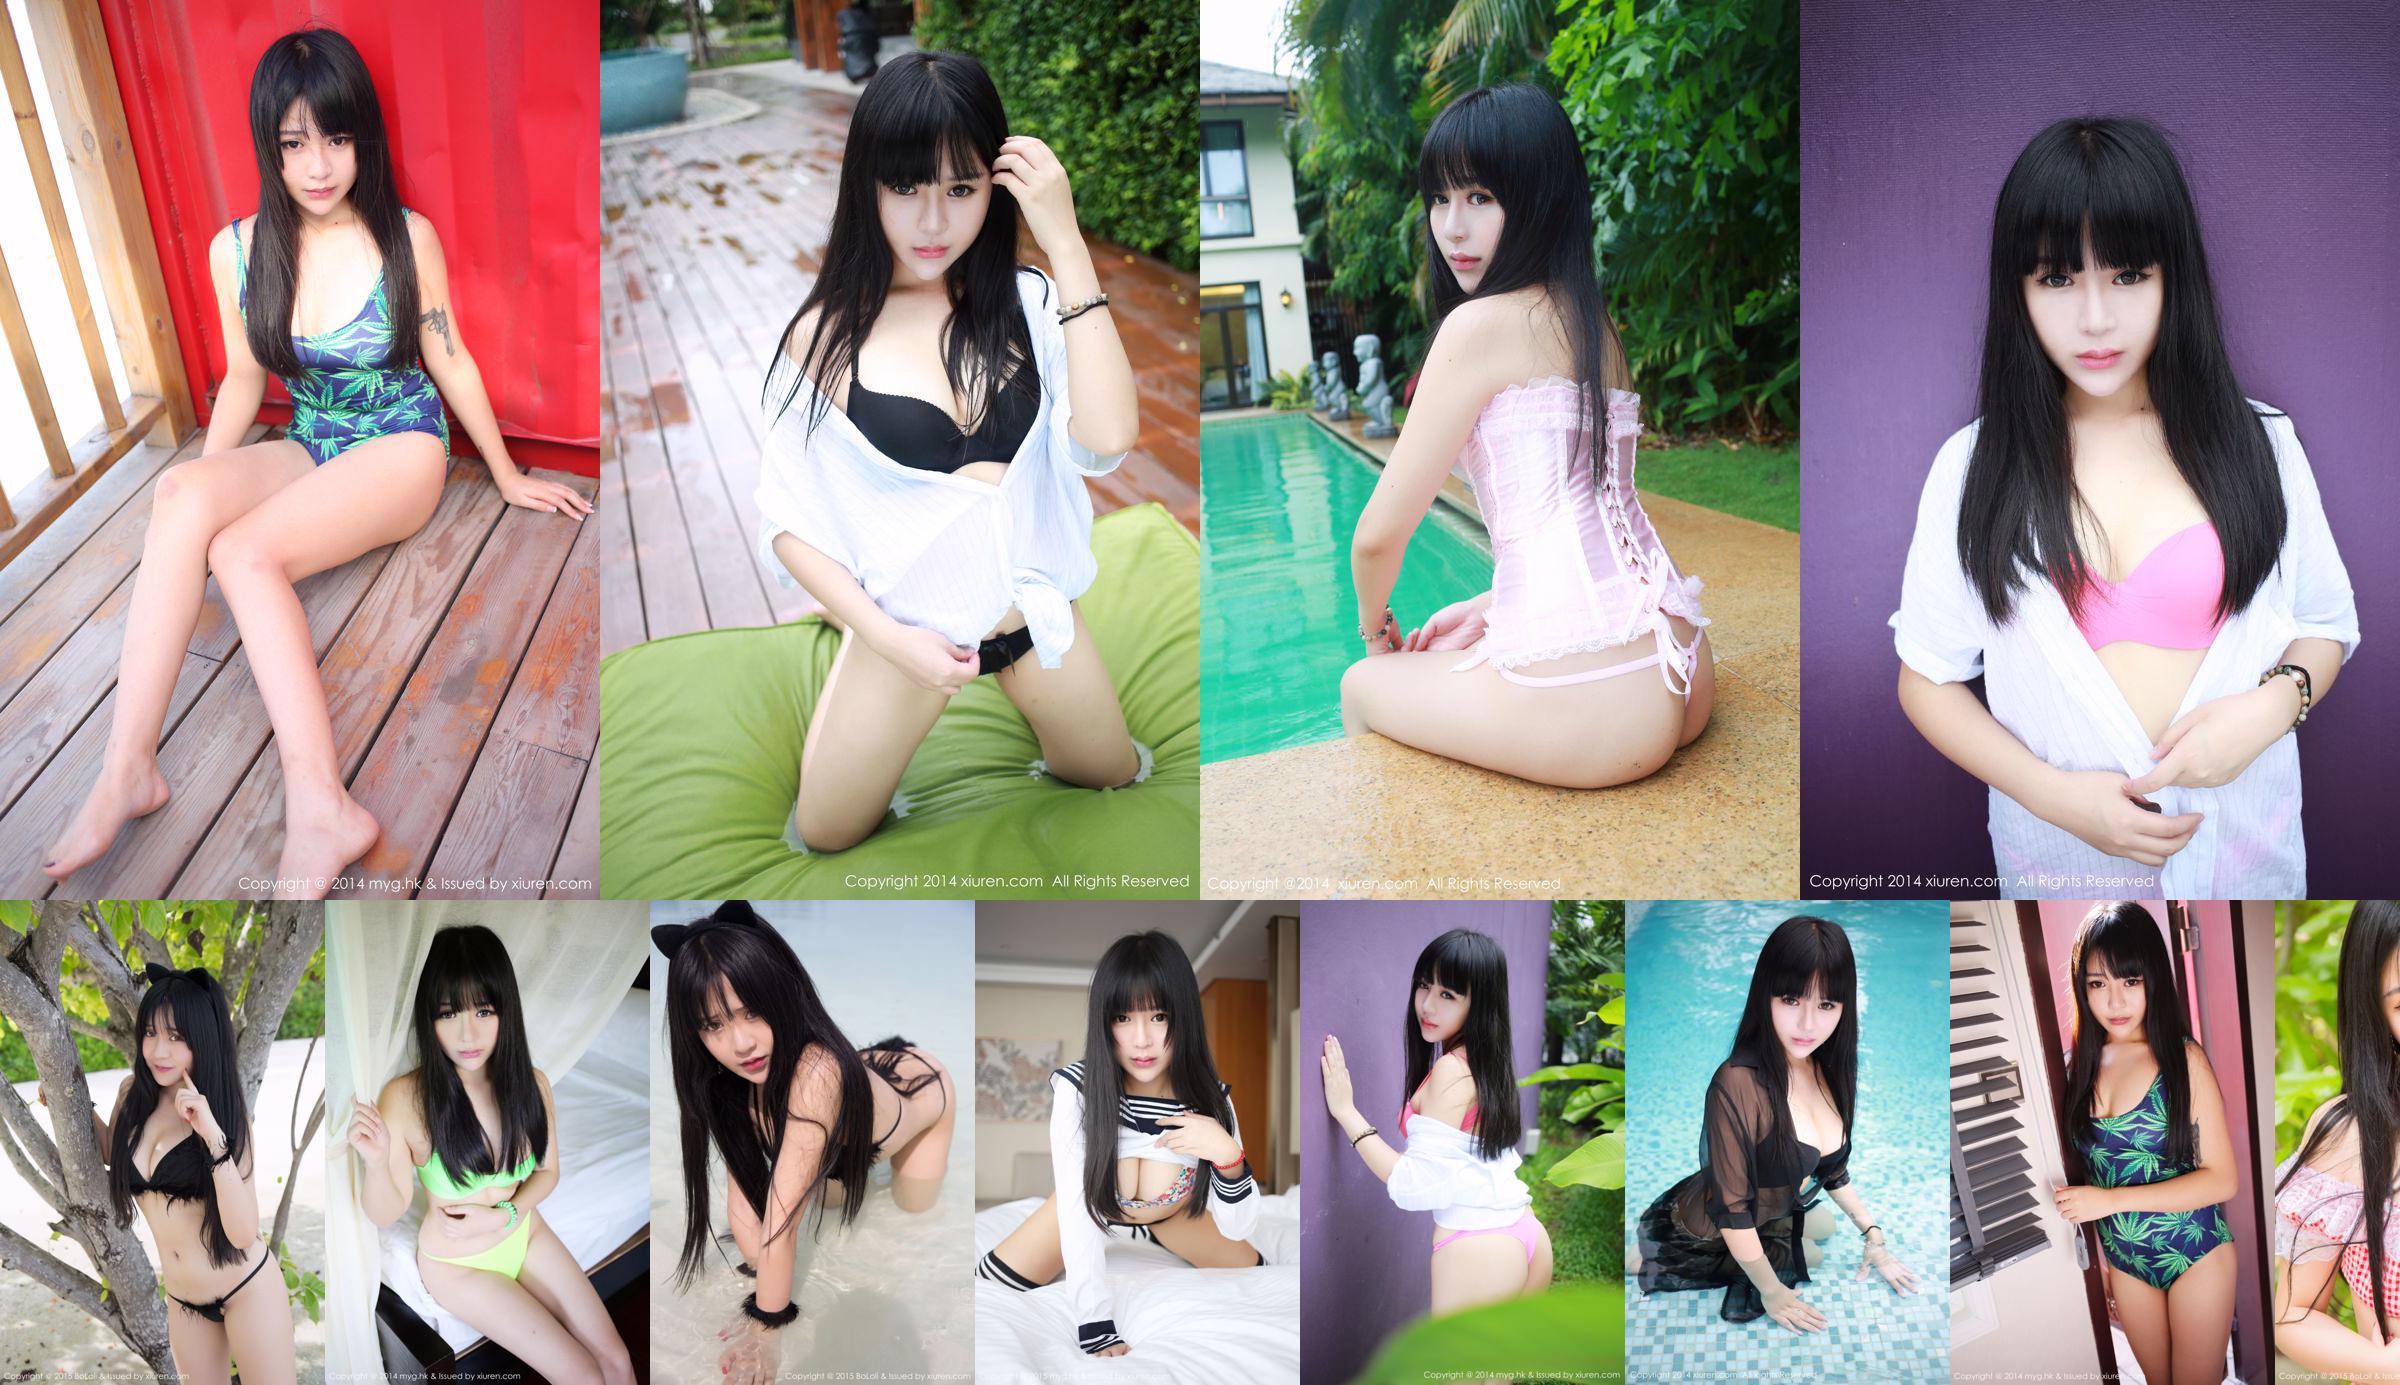 Fille littéraire @ Happo icey "Sanya Travel Shooting" [Mihimekan My Girl] Vol.046 No.b24a04 Page 9